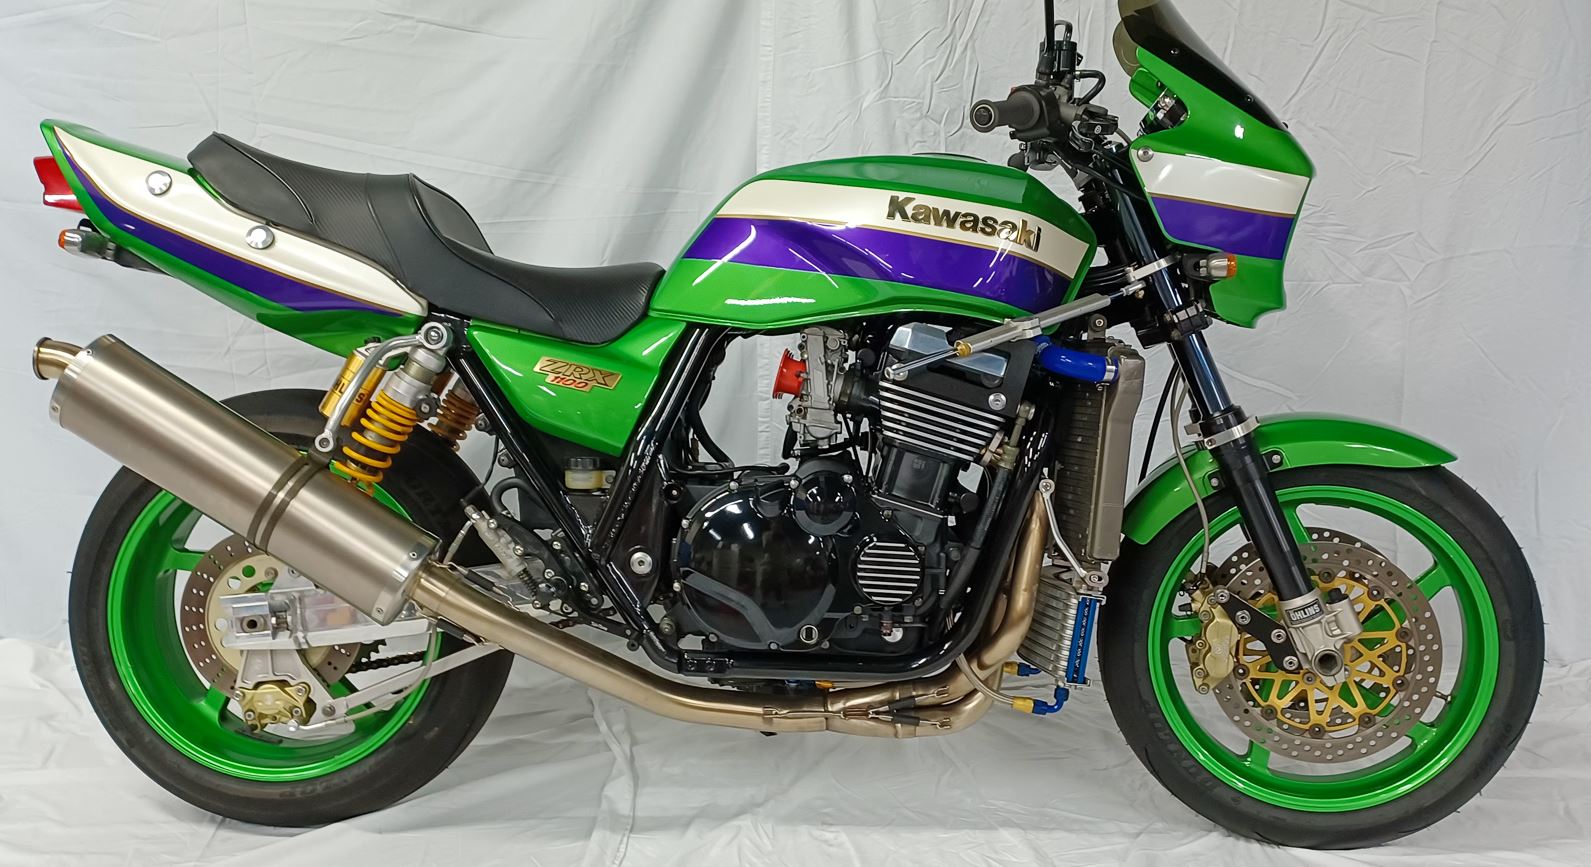 KAWASAKI ZX1100 for sale archives